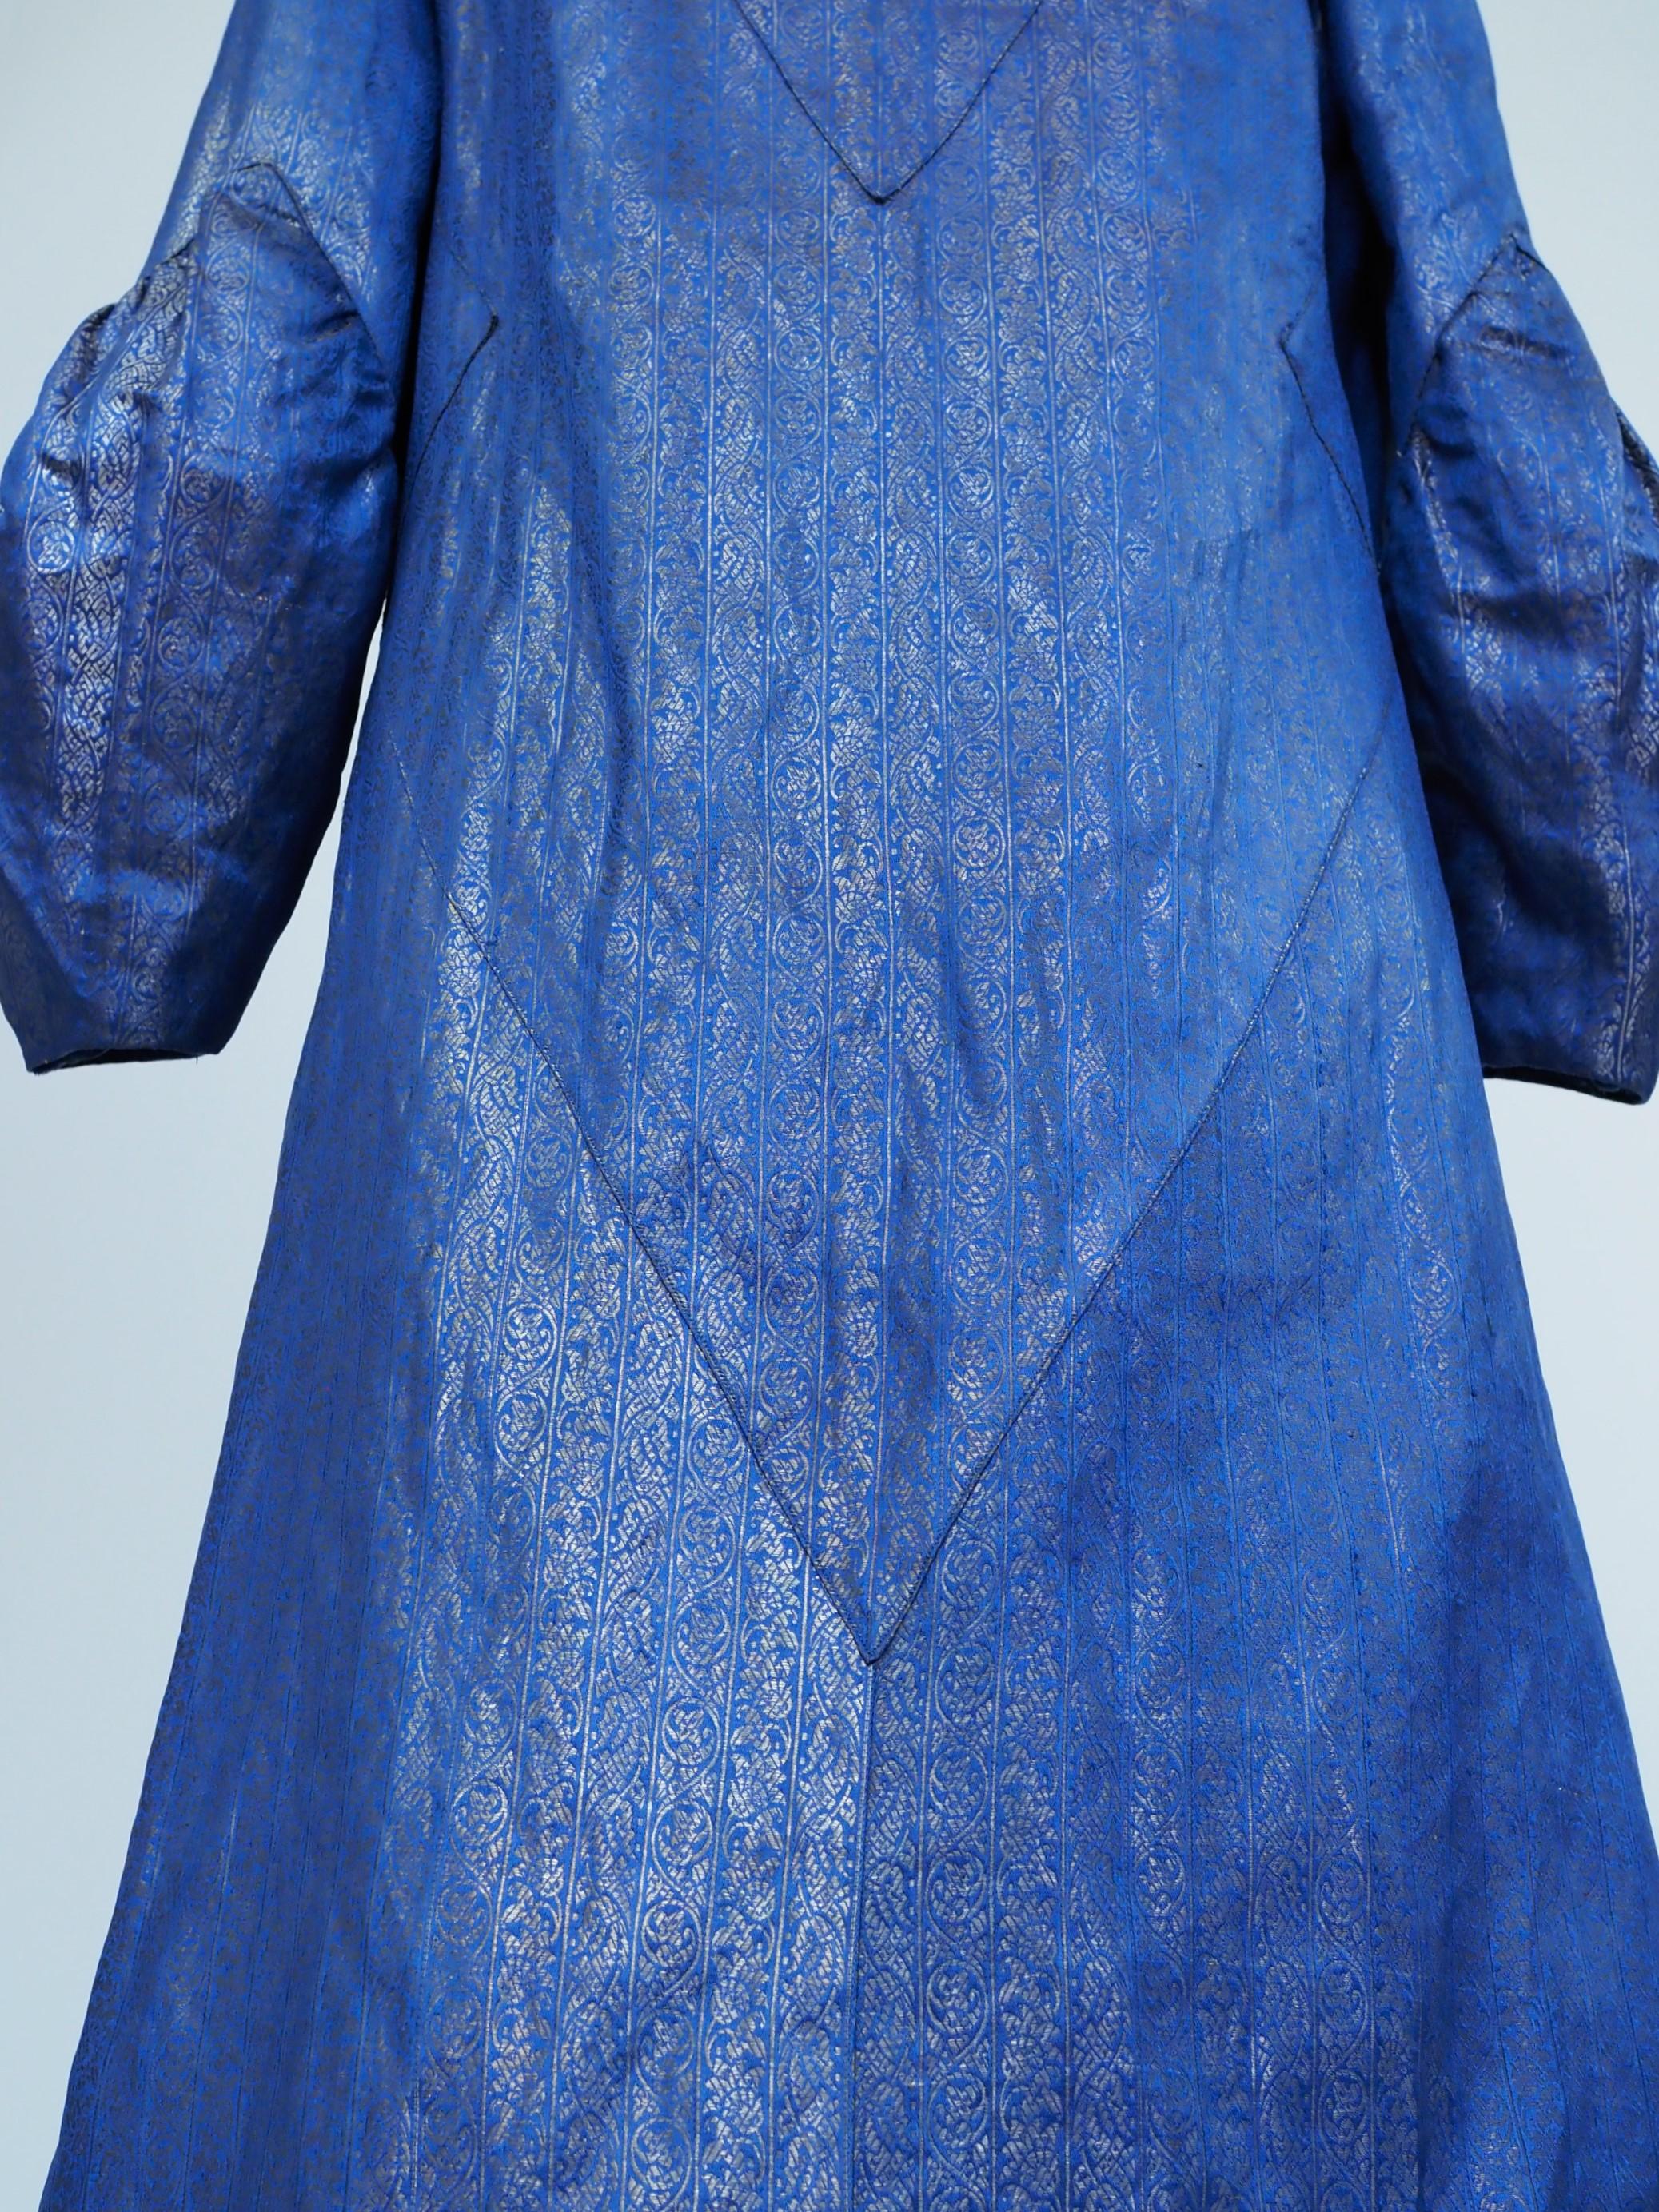 Evening Couture coat in silver lamé by Germaine Lecomte N°03871 Paris Circa 1930 For Sale 9